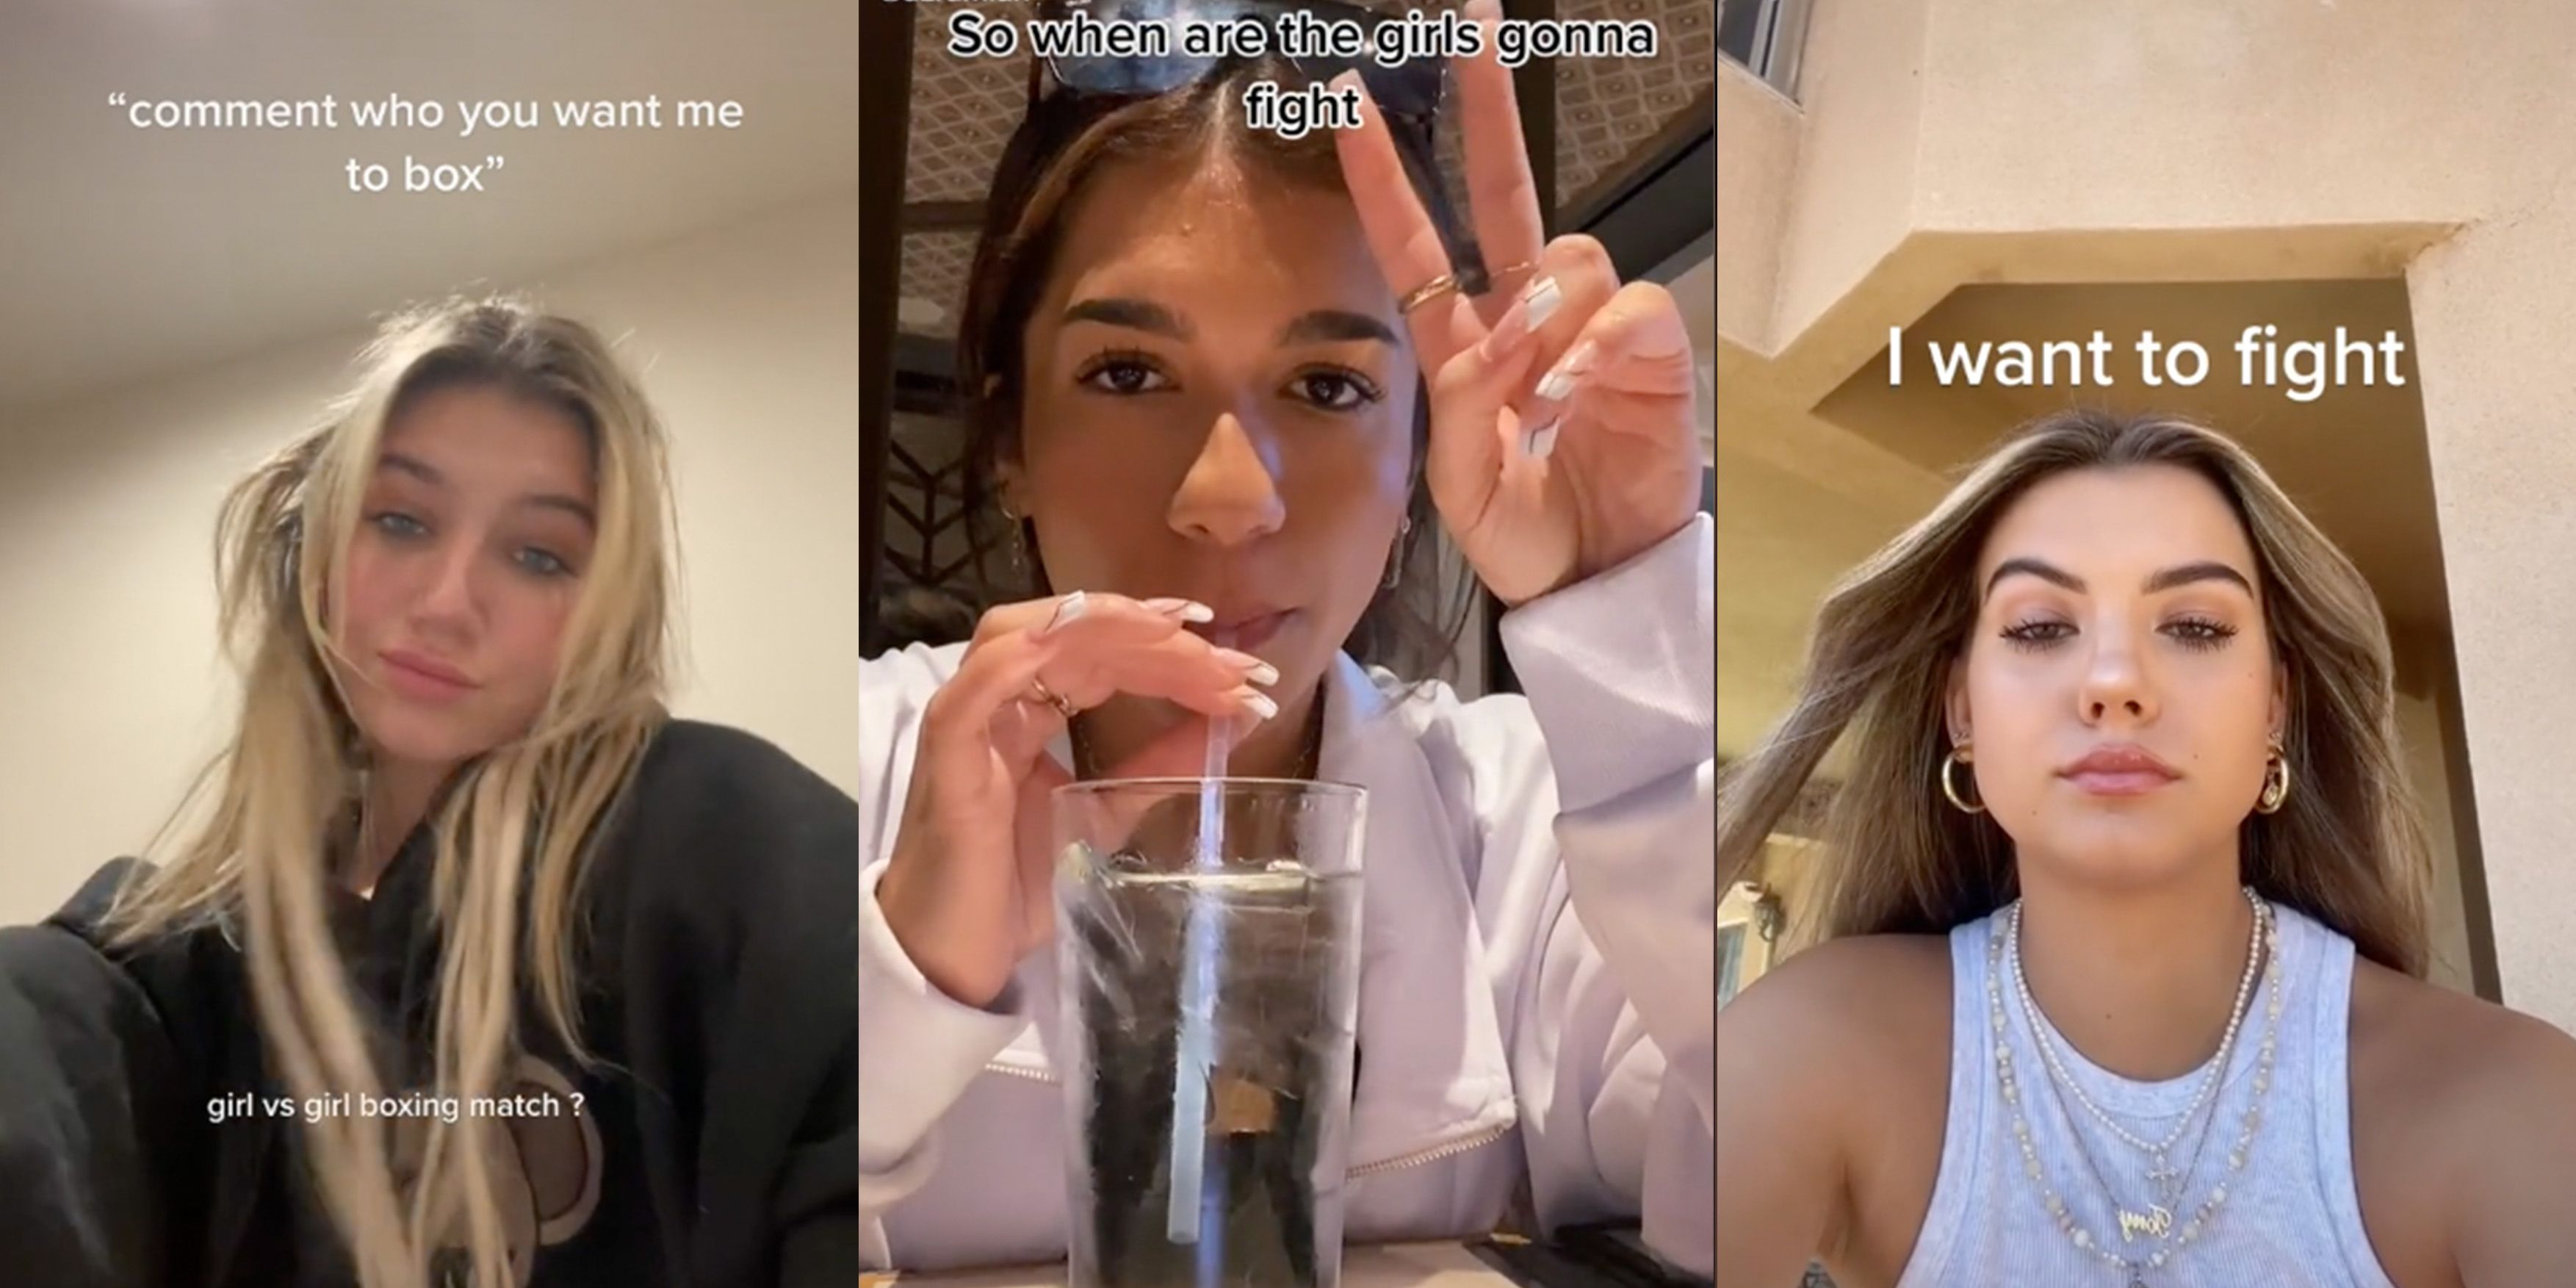 Mads Lewis and Other Female TikTok Stars Say They Want to Box Following Bryce Halls Match